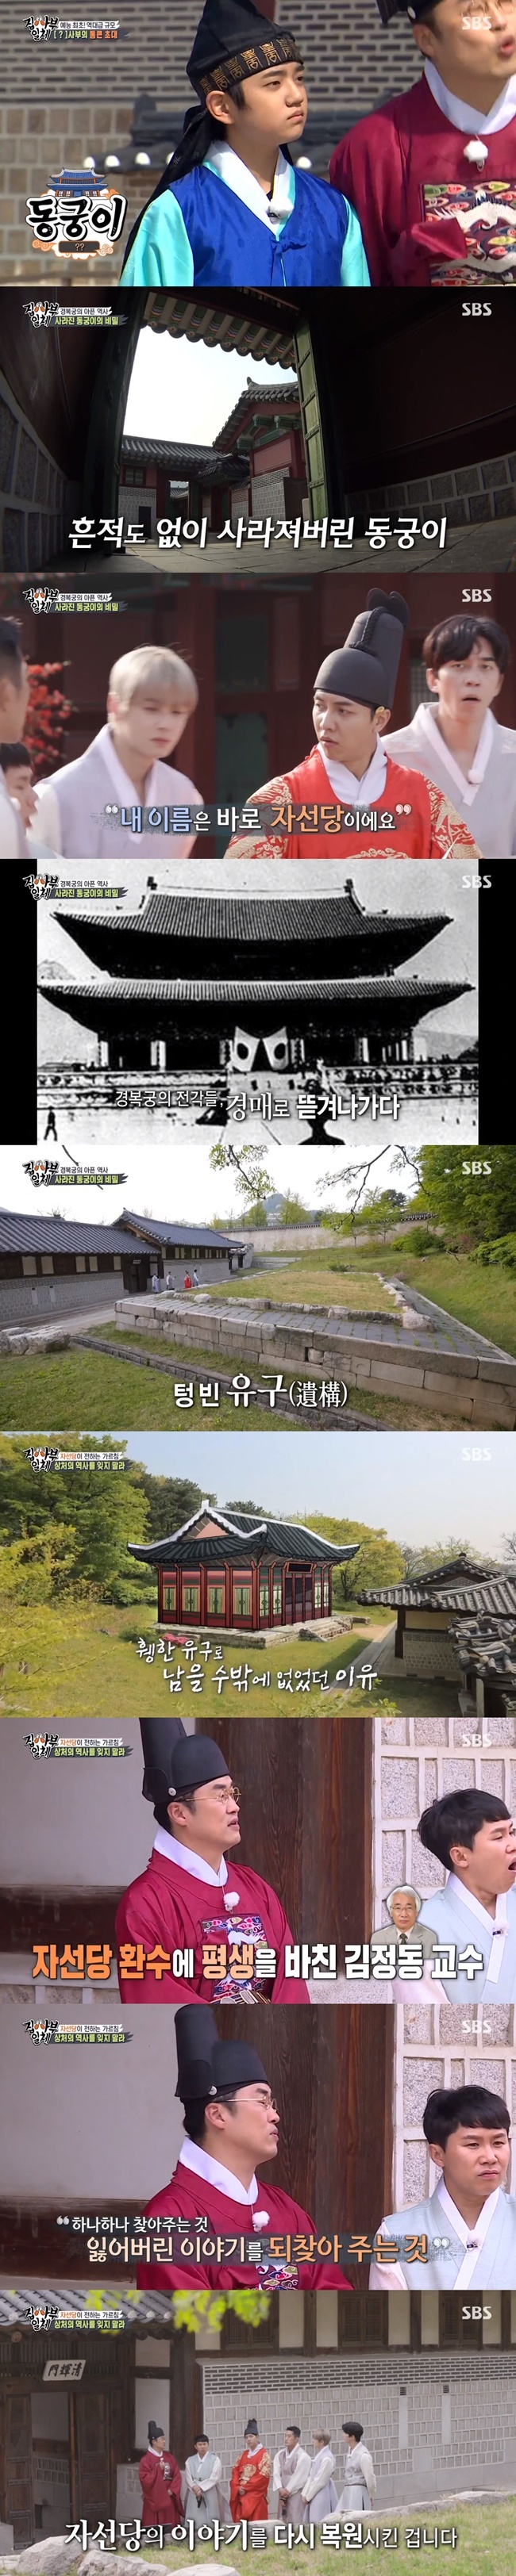 All The Butlers was the first performing arts to feature the whole gyeongbokgung.On SBS All The Butlers, which aired on May 2, members who succeeded in the entire Gyongbokgung for the first time in the entertainment and returned to the Joseon Dynasty with a time slip with the non-personal master Gyeongbokgung were revealed.The production team said, We were shooting at Gyongbokgung with special permission from the Cultural Heritage Administration.It was the first time in the history of domestic entertainment, and it was the first time that Gyeongbokgung was the whole. Choi Tae-seong, a history lecturer, and Kim Kang-hoon, a child actor, appeared as characters to introduce the master.Choi Tae-seong introduced himself as a cadet and Kim Kang-hoon as Goodbye My Princess.The members toured the gyeongbokgung with the explanation of Choi Tae-seong.In particular, the inside of the Geunjeongjeon, where the kings ceremony or ceremony was held, was revealed for the first time in the entertainment industry.It was a pair of yellow dragon sculptures that harassed Yeouiju that welcomed the members who entered the Geunjeongjeon; Yang Se-hyeong could not shut up, saying, Its creepy.In particular, Ilwol Obongdo, which symbolizes the authority and dignity of the king behind the throne, also showed its presence on a unique scale. Lee Seung-gi said, From the kings perspective, this is the office.View is art, this is a gyeongbokgung view, he praised.The next destination was gyeonghoeru; Lee Seung-gi said, Is not it gyeonghoeru that was behind the old ten thousand won?The society is a mobile society - where they used to give banquets or enjoy drinking, Choi Tae-seong explained.The members also walked through gyeonghoeru to the charity hall, the space of Sejabin.Choi Tae-seong said, There has been a message to pick the one who will be the double king so the members tested the kings qualities under the course of Goodbye My Princess.Lee Seung-gi succeeded in winning the kings place through listening to the song, matching the title of the historical drama, and matching the Korean language.Among these problems: Goodbye My Princess suddenly disappeared while enjoying Gammu. Yang Se-hyeong said, What is this crame scene?The no-man came to Diary as a clue to finding Goodbye My Princess.Goodbye My Princess is called Goodbye My Princess because it is the palace in the east, said Diary of Goodbye My Princess. My name is Charity Party.Members headed back to the Charity House to find Goodbye My Princess; another Diary was found at the Charity House.Diaryen said, In 1895, Empress Myeongseong, a taxa mother, was murdered. The Japanese said that Gyongbokgung was auctioned.Geunjeongjeon, the heart of Gyeongbokgung, has a sunrise. The members were lamented by the Japanese nationalist policy.In the Geunjeongjeon, Diary was found, After a long effort by a Korean, I returned to my hometown Gyeongbokgung in 80 years, and I am now in the backyard of the Guncheong Palace.Only an empty estuary () was located in the backyard of Guncheonggung Palace, which followed Diary.Choi Tae-seong, a cadet, visited the puzzled members.Choi Tae-seong said, It is originally normal to have a charity party on this base. Gyeongbokgung pavilions were torn out and auctioned.In the process, the Charity Party was also used as a private museum of Japanese people under the name of Chosun Pavilion. However, the Charity Party was destroyed by fire during the Kanto earthquake. The charity party, which was left unattended, succeeded in returning it to the country after the efforts of Professor Kim Jung-dong, who was a visiting professor at Tokyo University at the time.Choi Tae-seong also said, This is the place where Empress Myeongseong was murdered and the body was burned. The charity party where the Joseon taxman played was also burned and it was on the same scene.